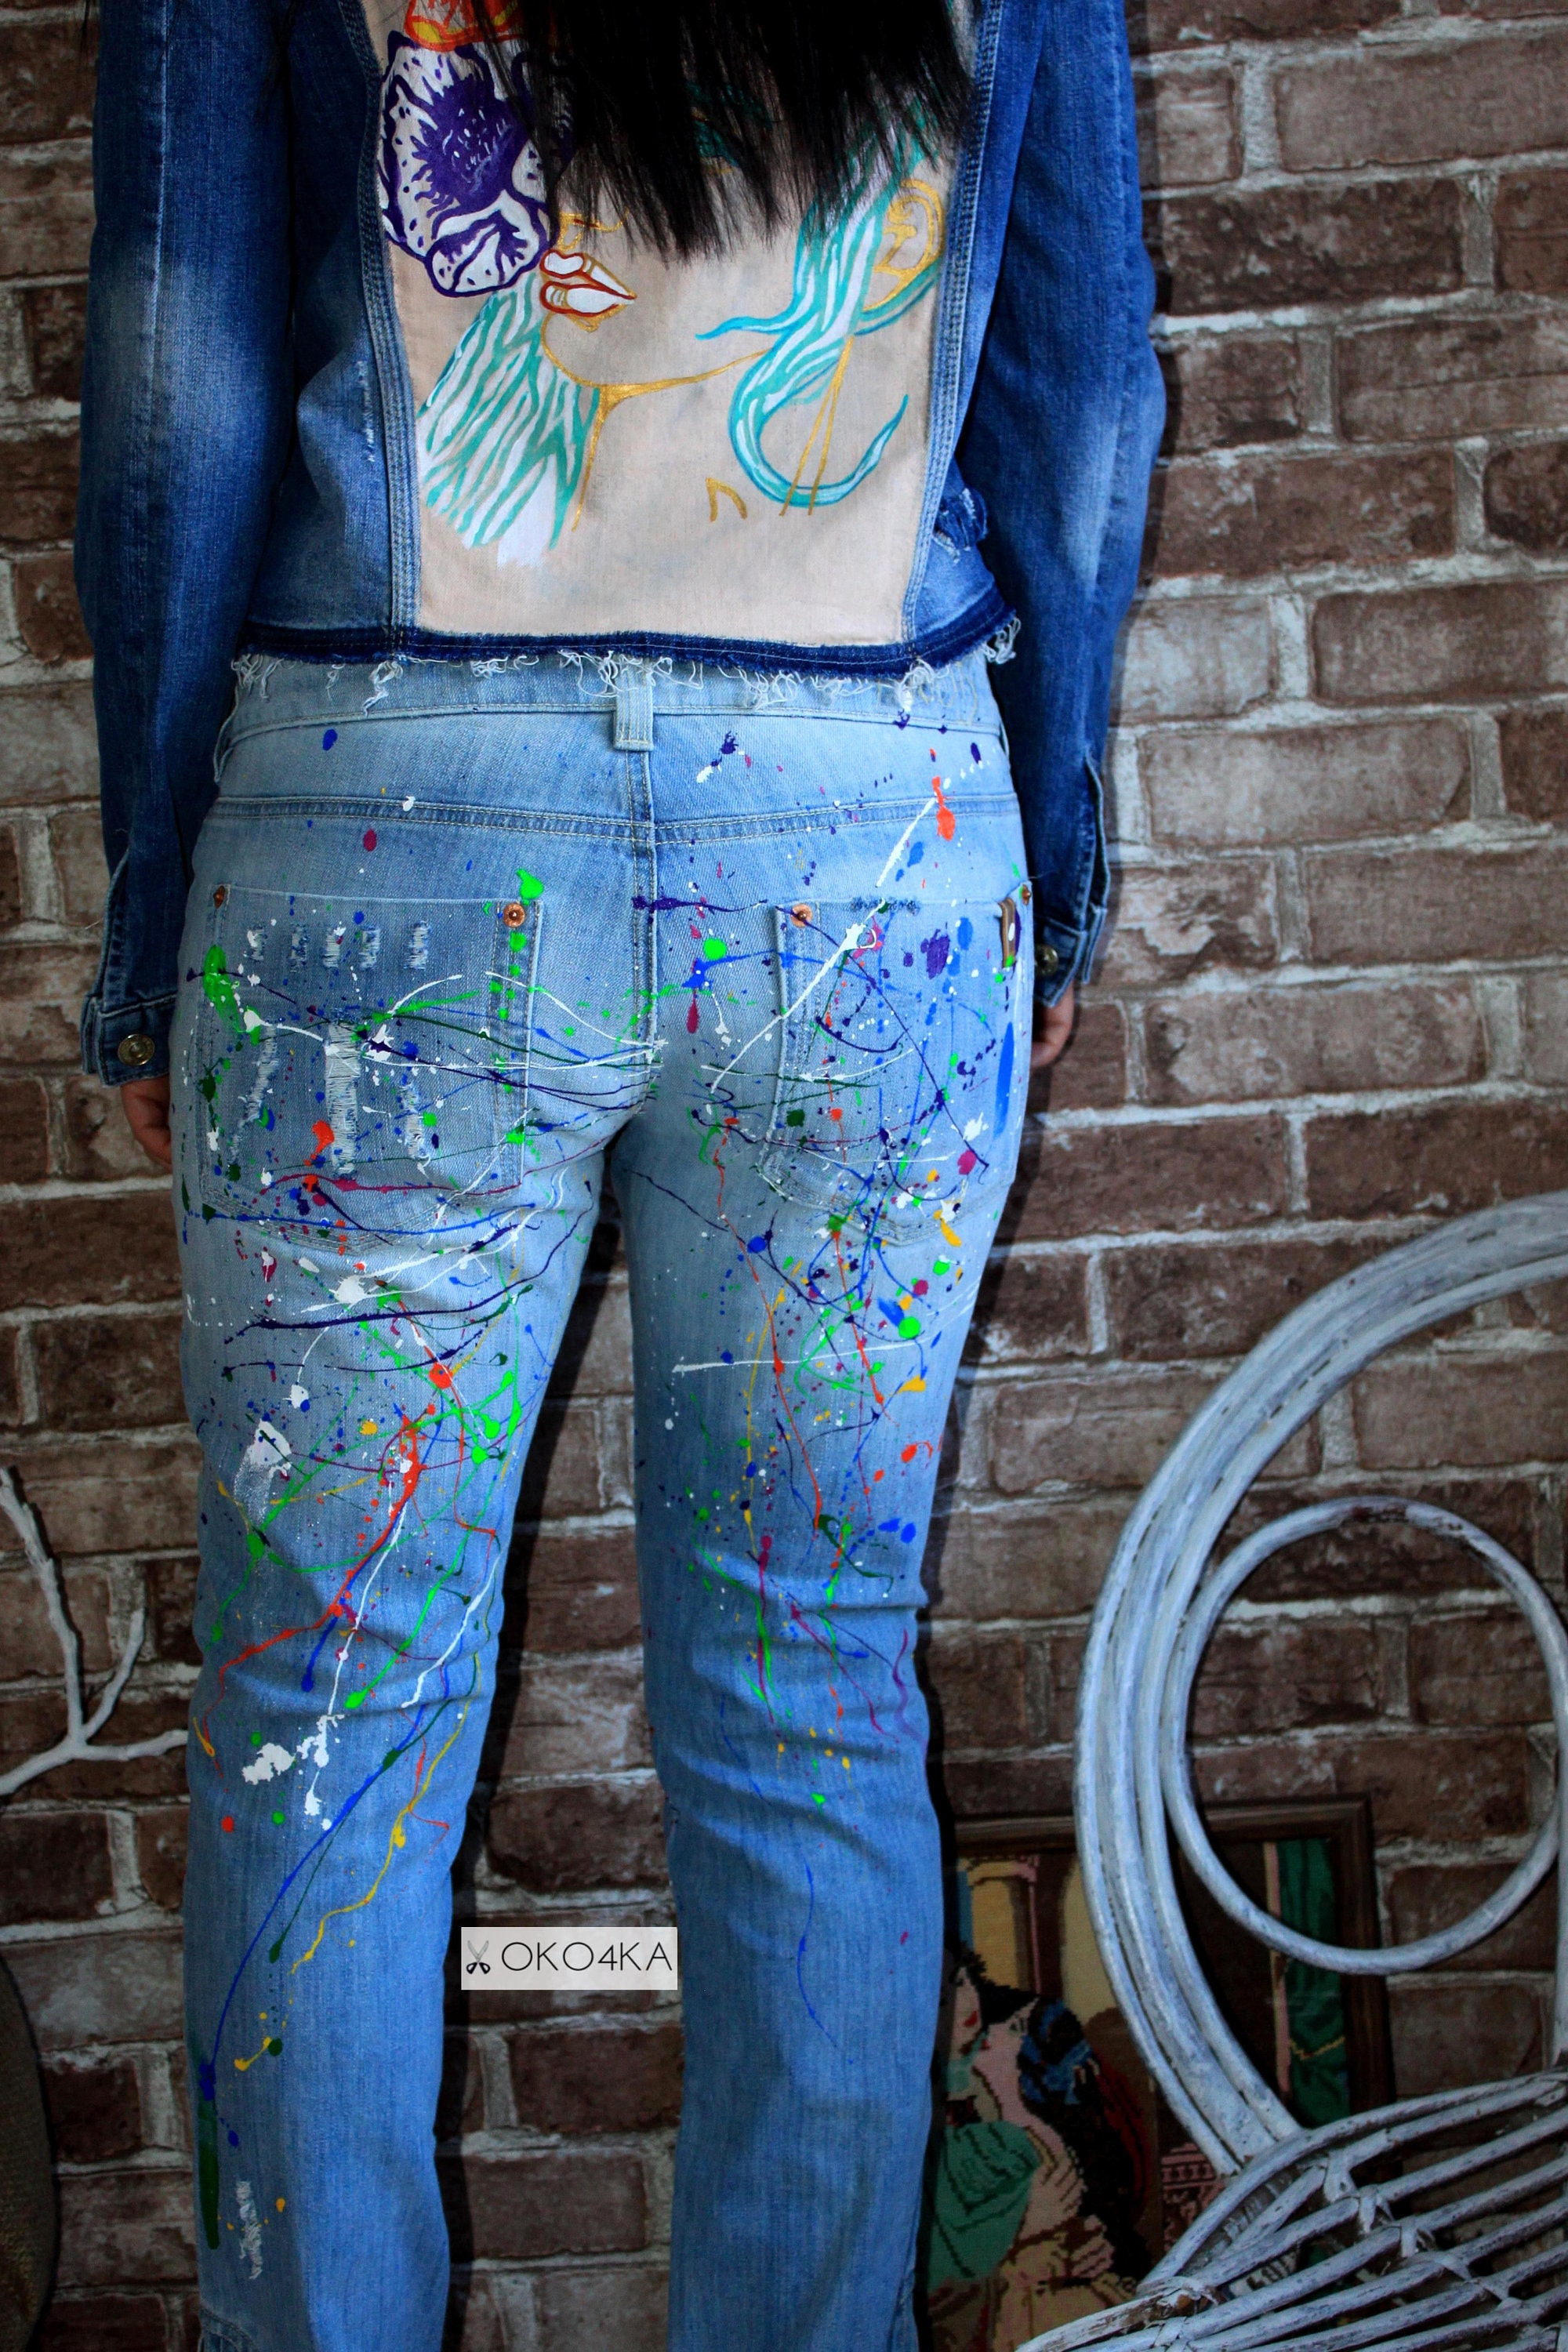 Pants Blotches Gift for Cristmas Spray Paint Paint Splatter -   Hand  painted clothing, Paint splatter jeans, Fancy birthday party